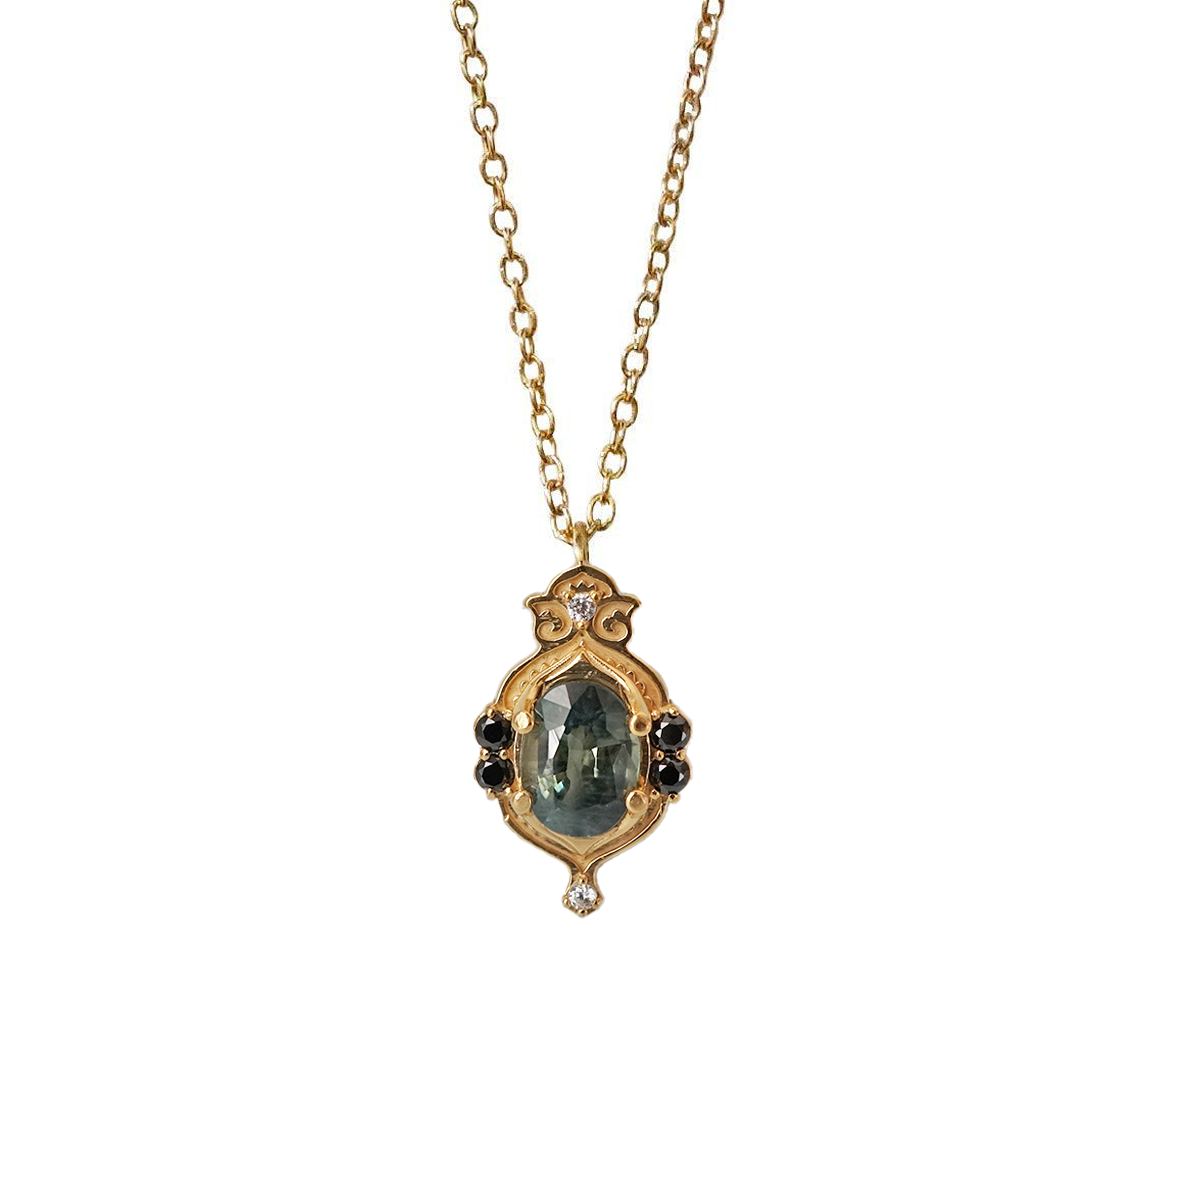 Teal Sapphire Sands of Time Necklace